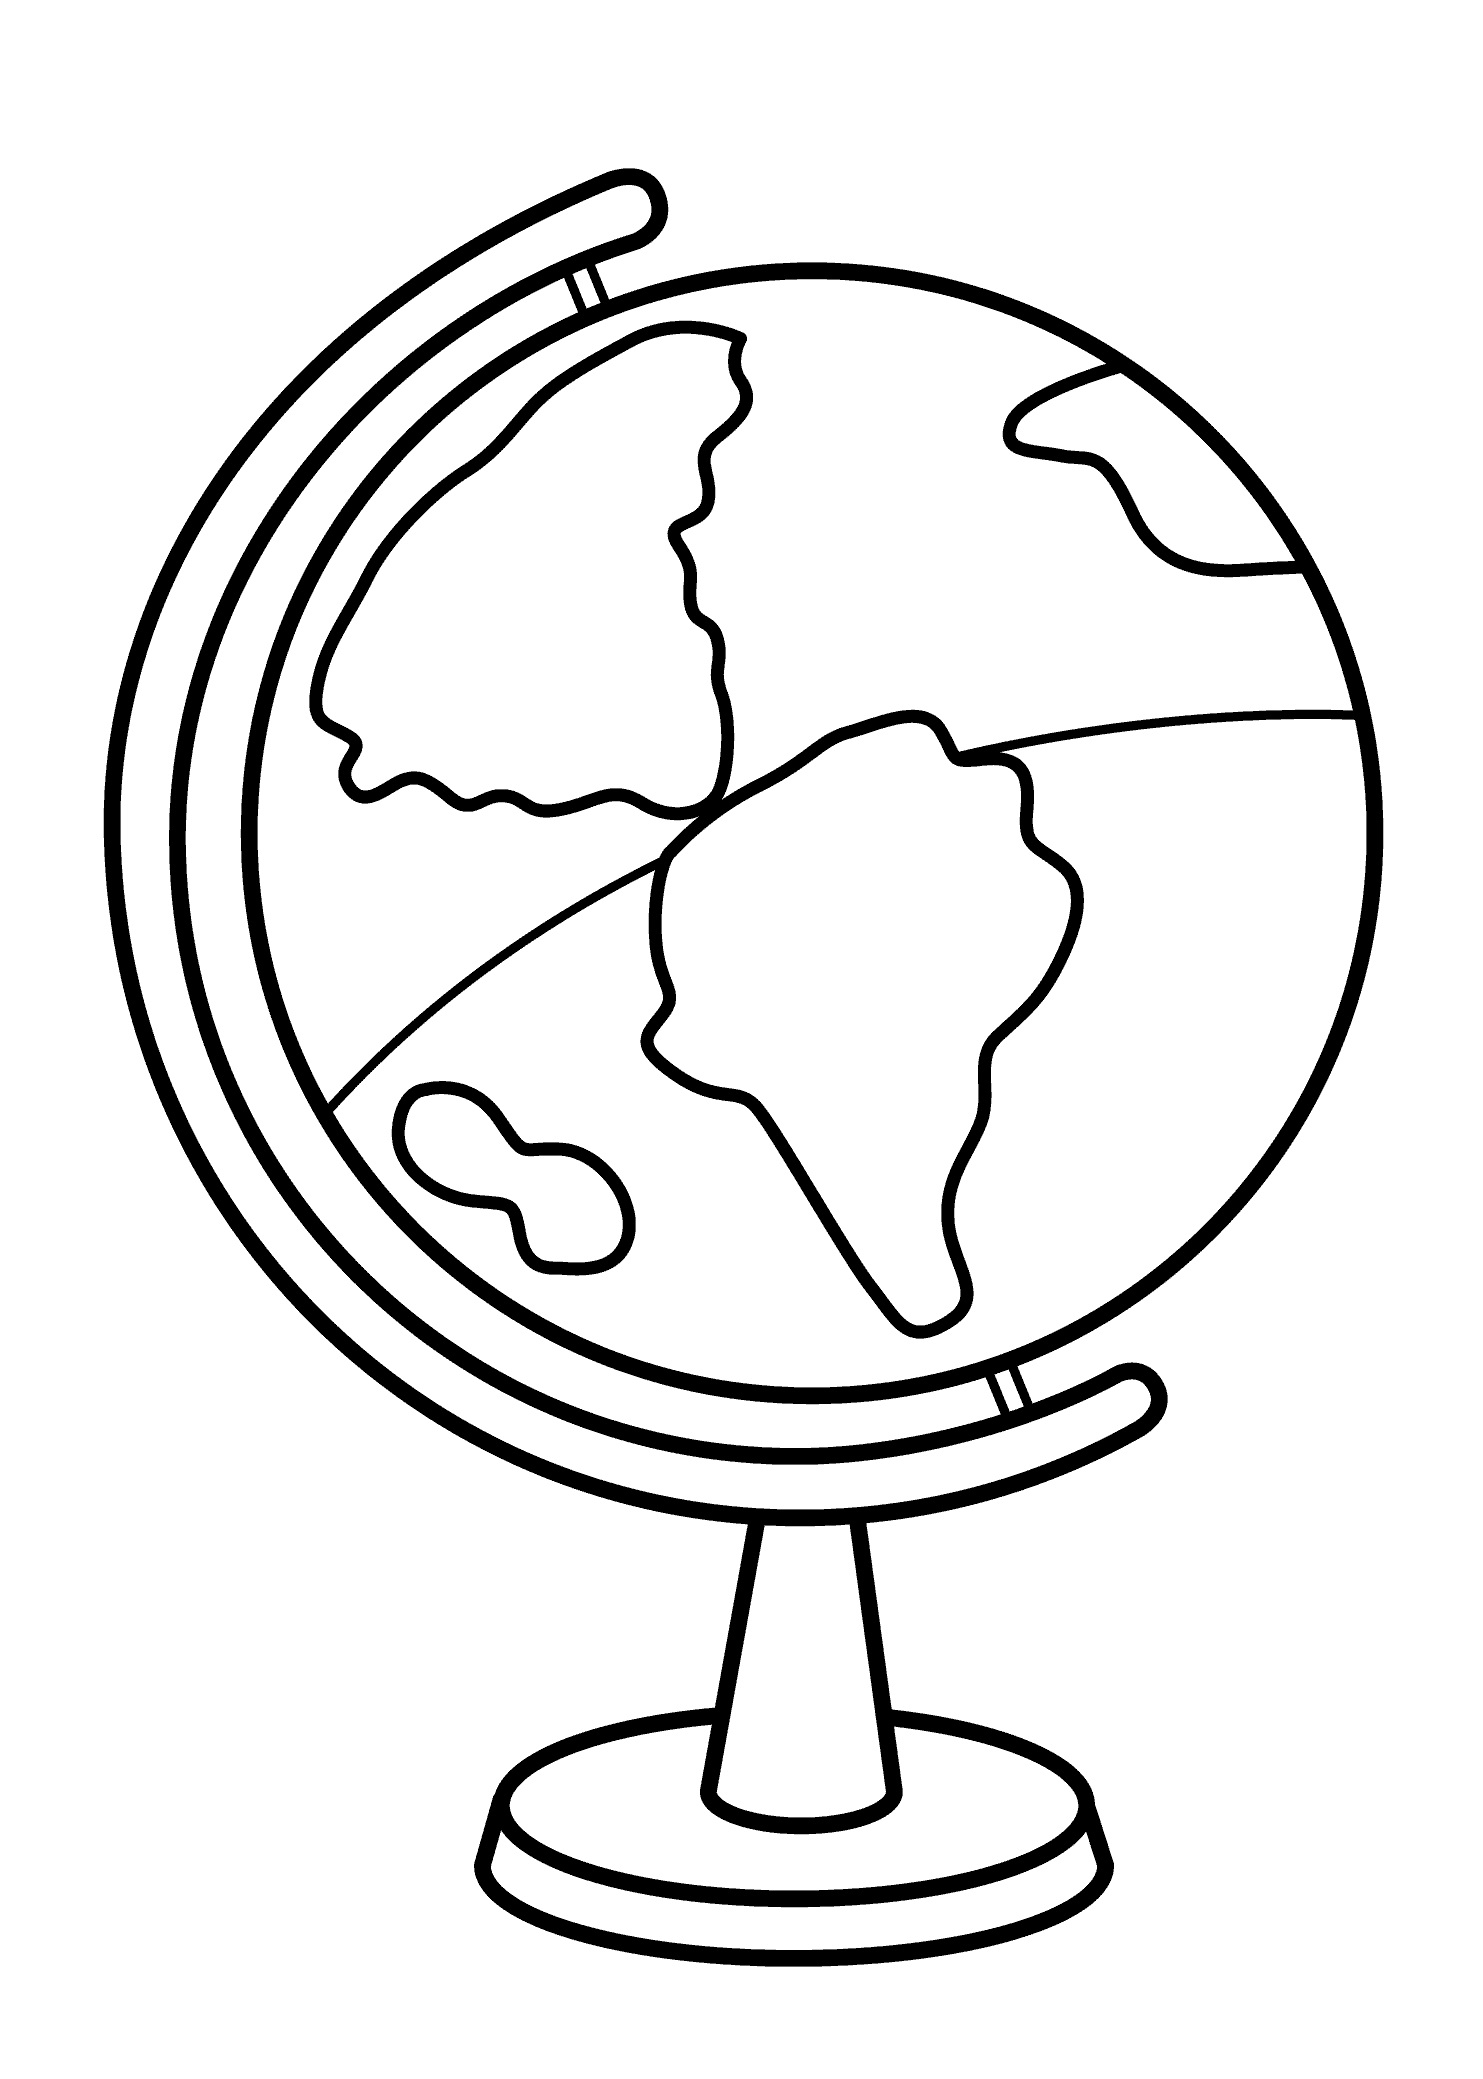 Globe coloring page.